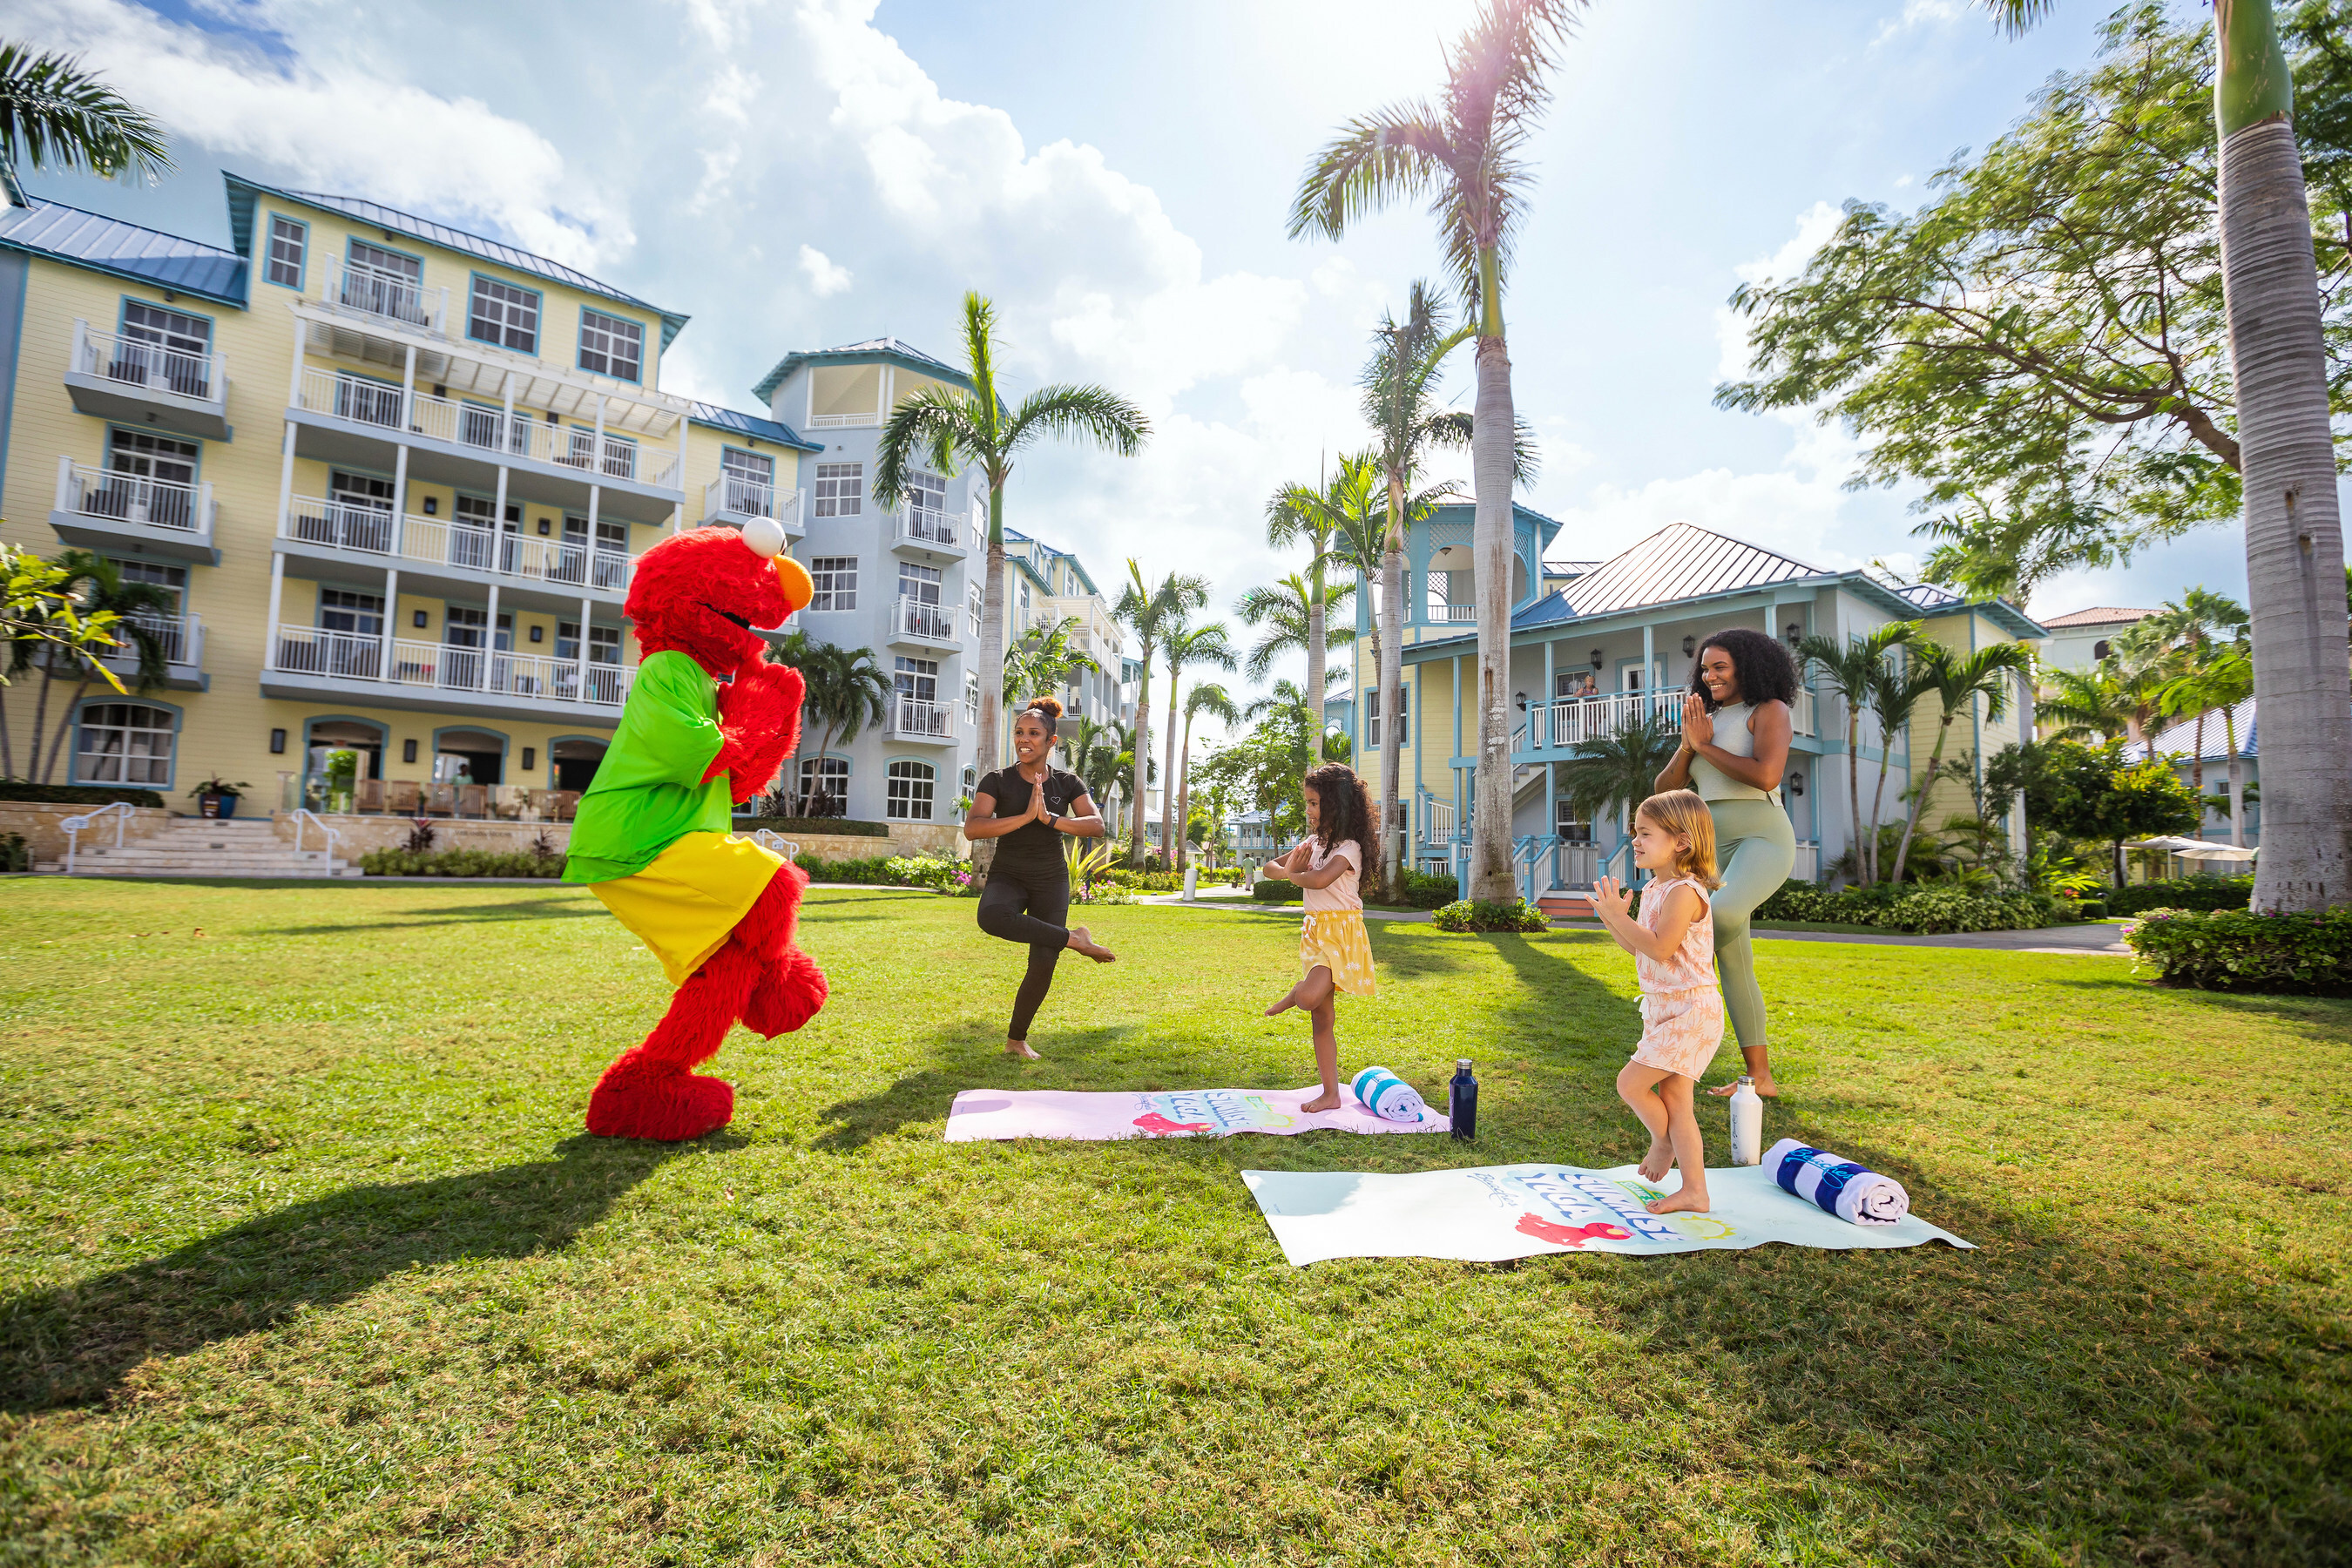 Beaches Resorts and Sesame Workshop introduce Sesame Street Sunrise Yoga at Caribbean locations, promoting family connection and mindfulness during summer vacations and beyond. Enjoy yoga with Sesame Street friends in a fun, emotionally nurturing experience.